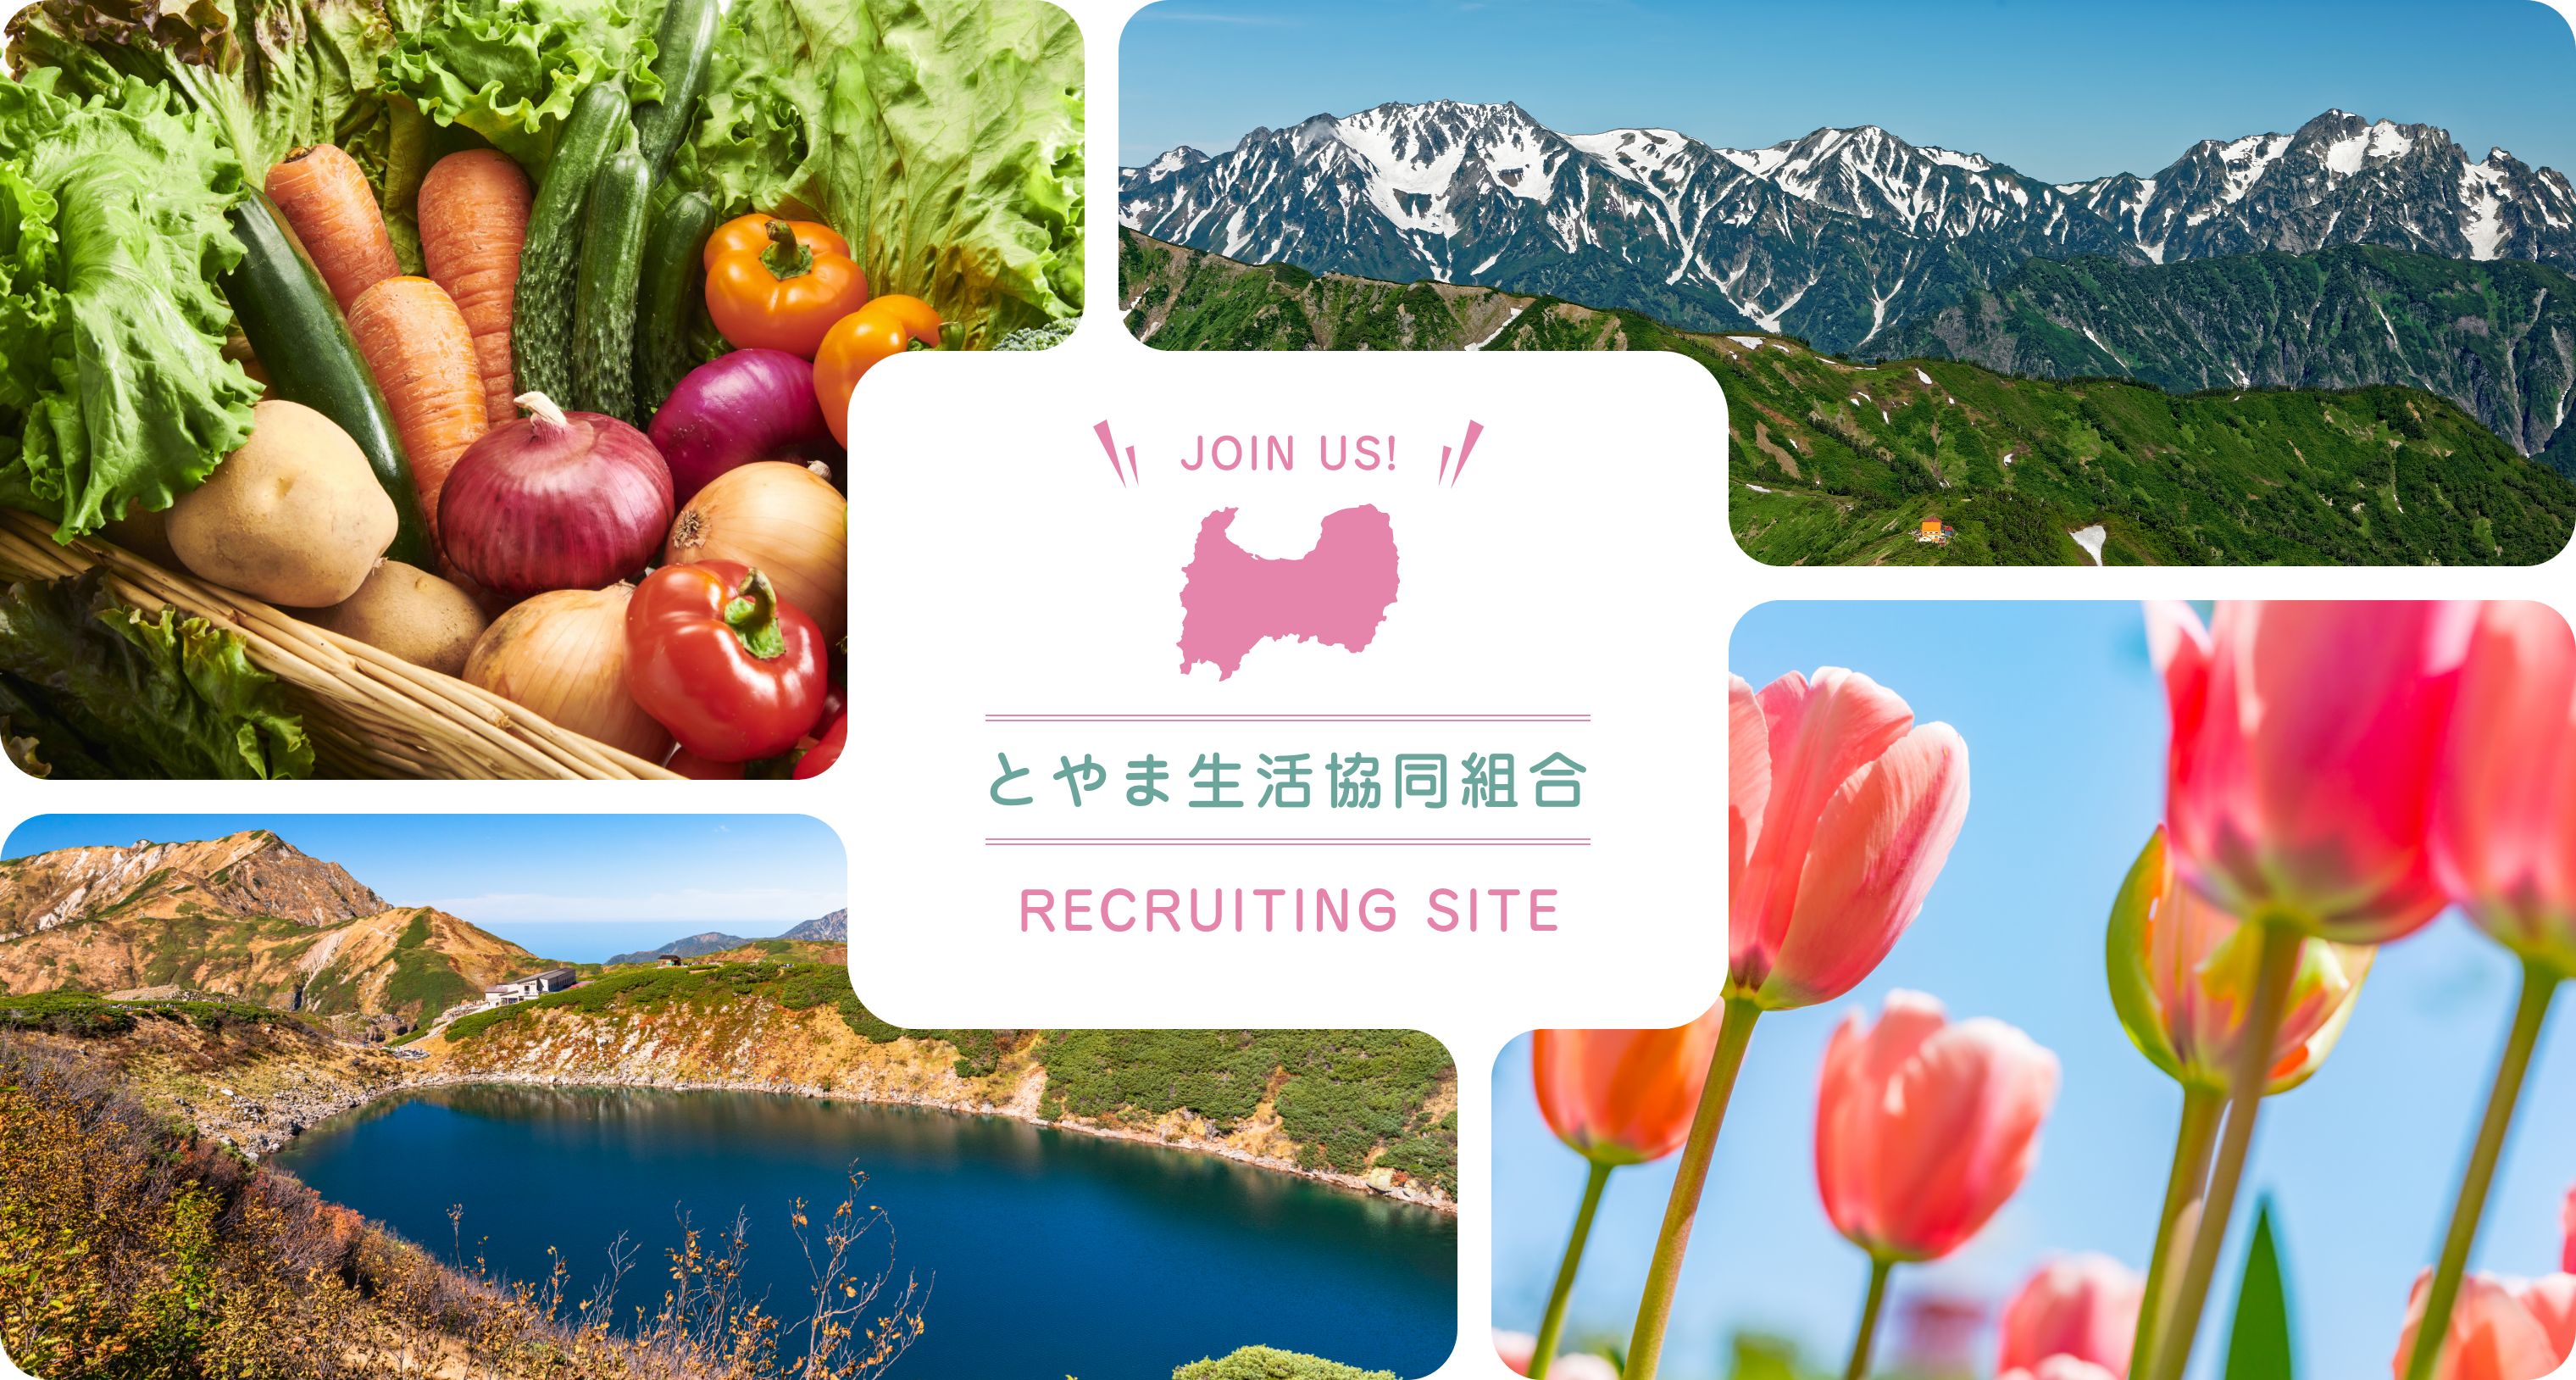 JOIN US! とやま生活協同組合 RECRUITING SITE